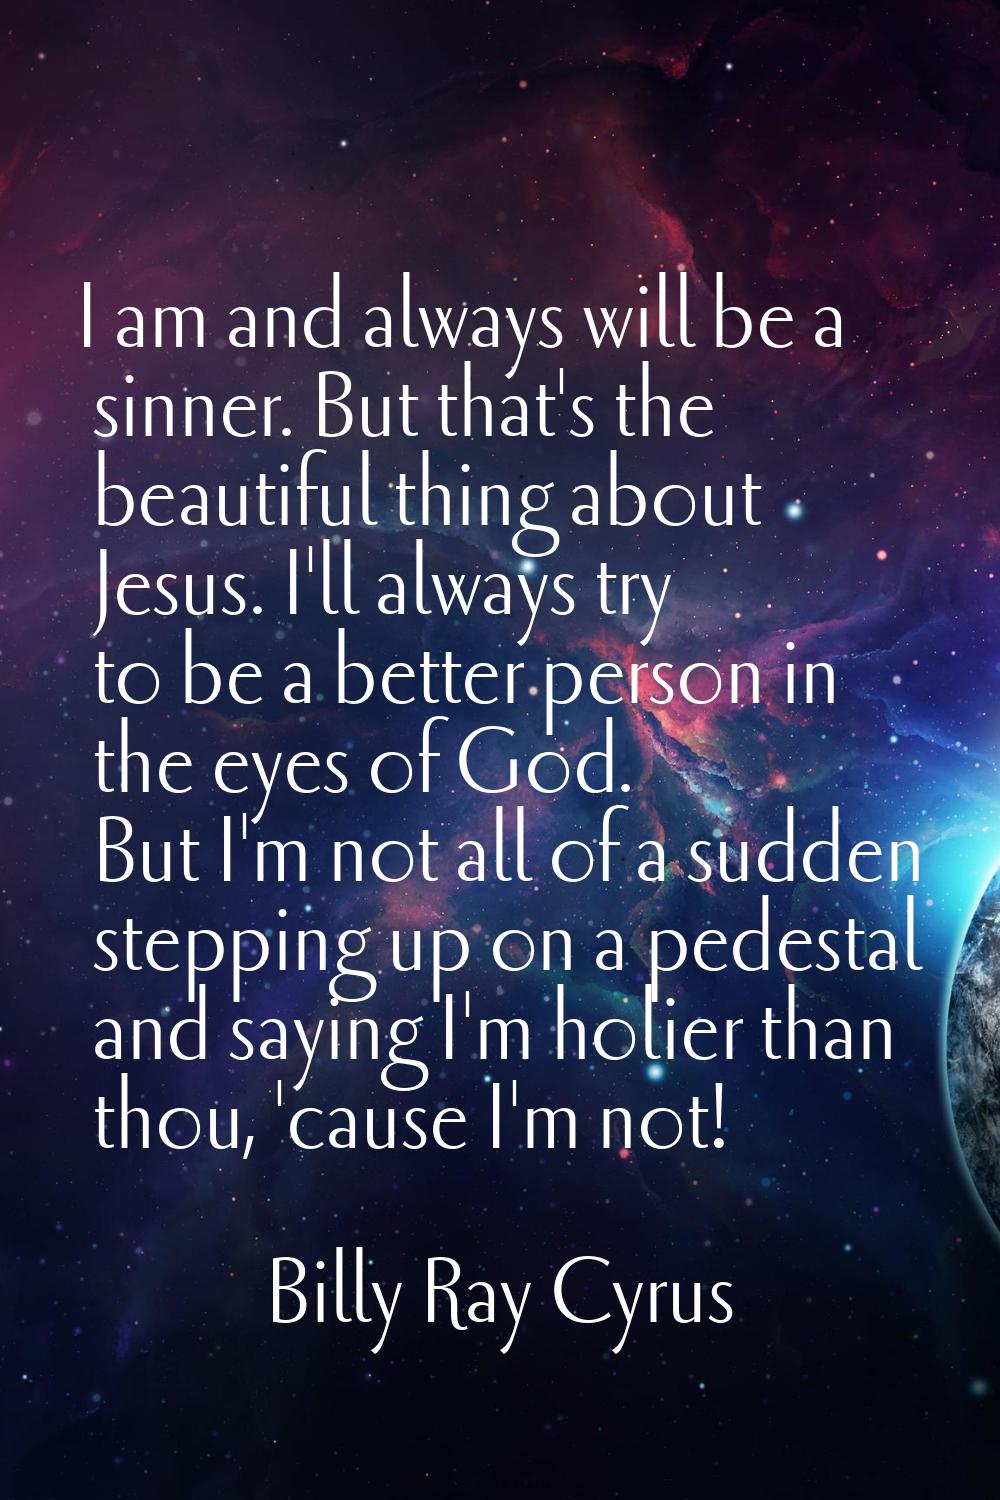 I am and always will be a sinner. But that's the beautiful thing about Jesus. I'll always try to be